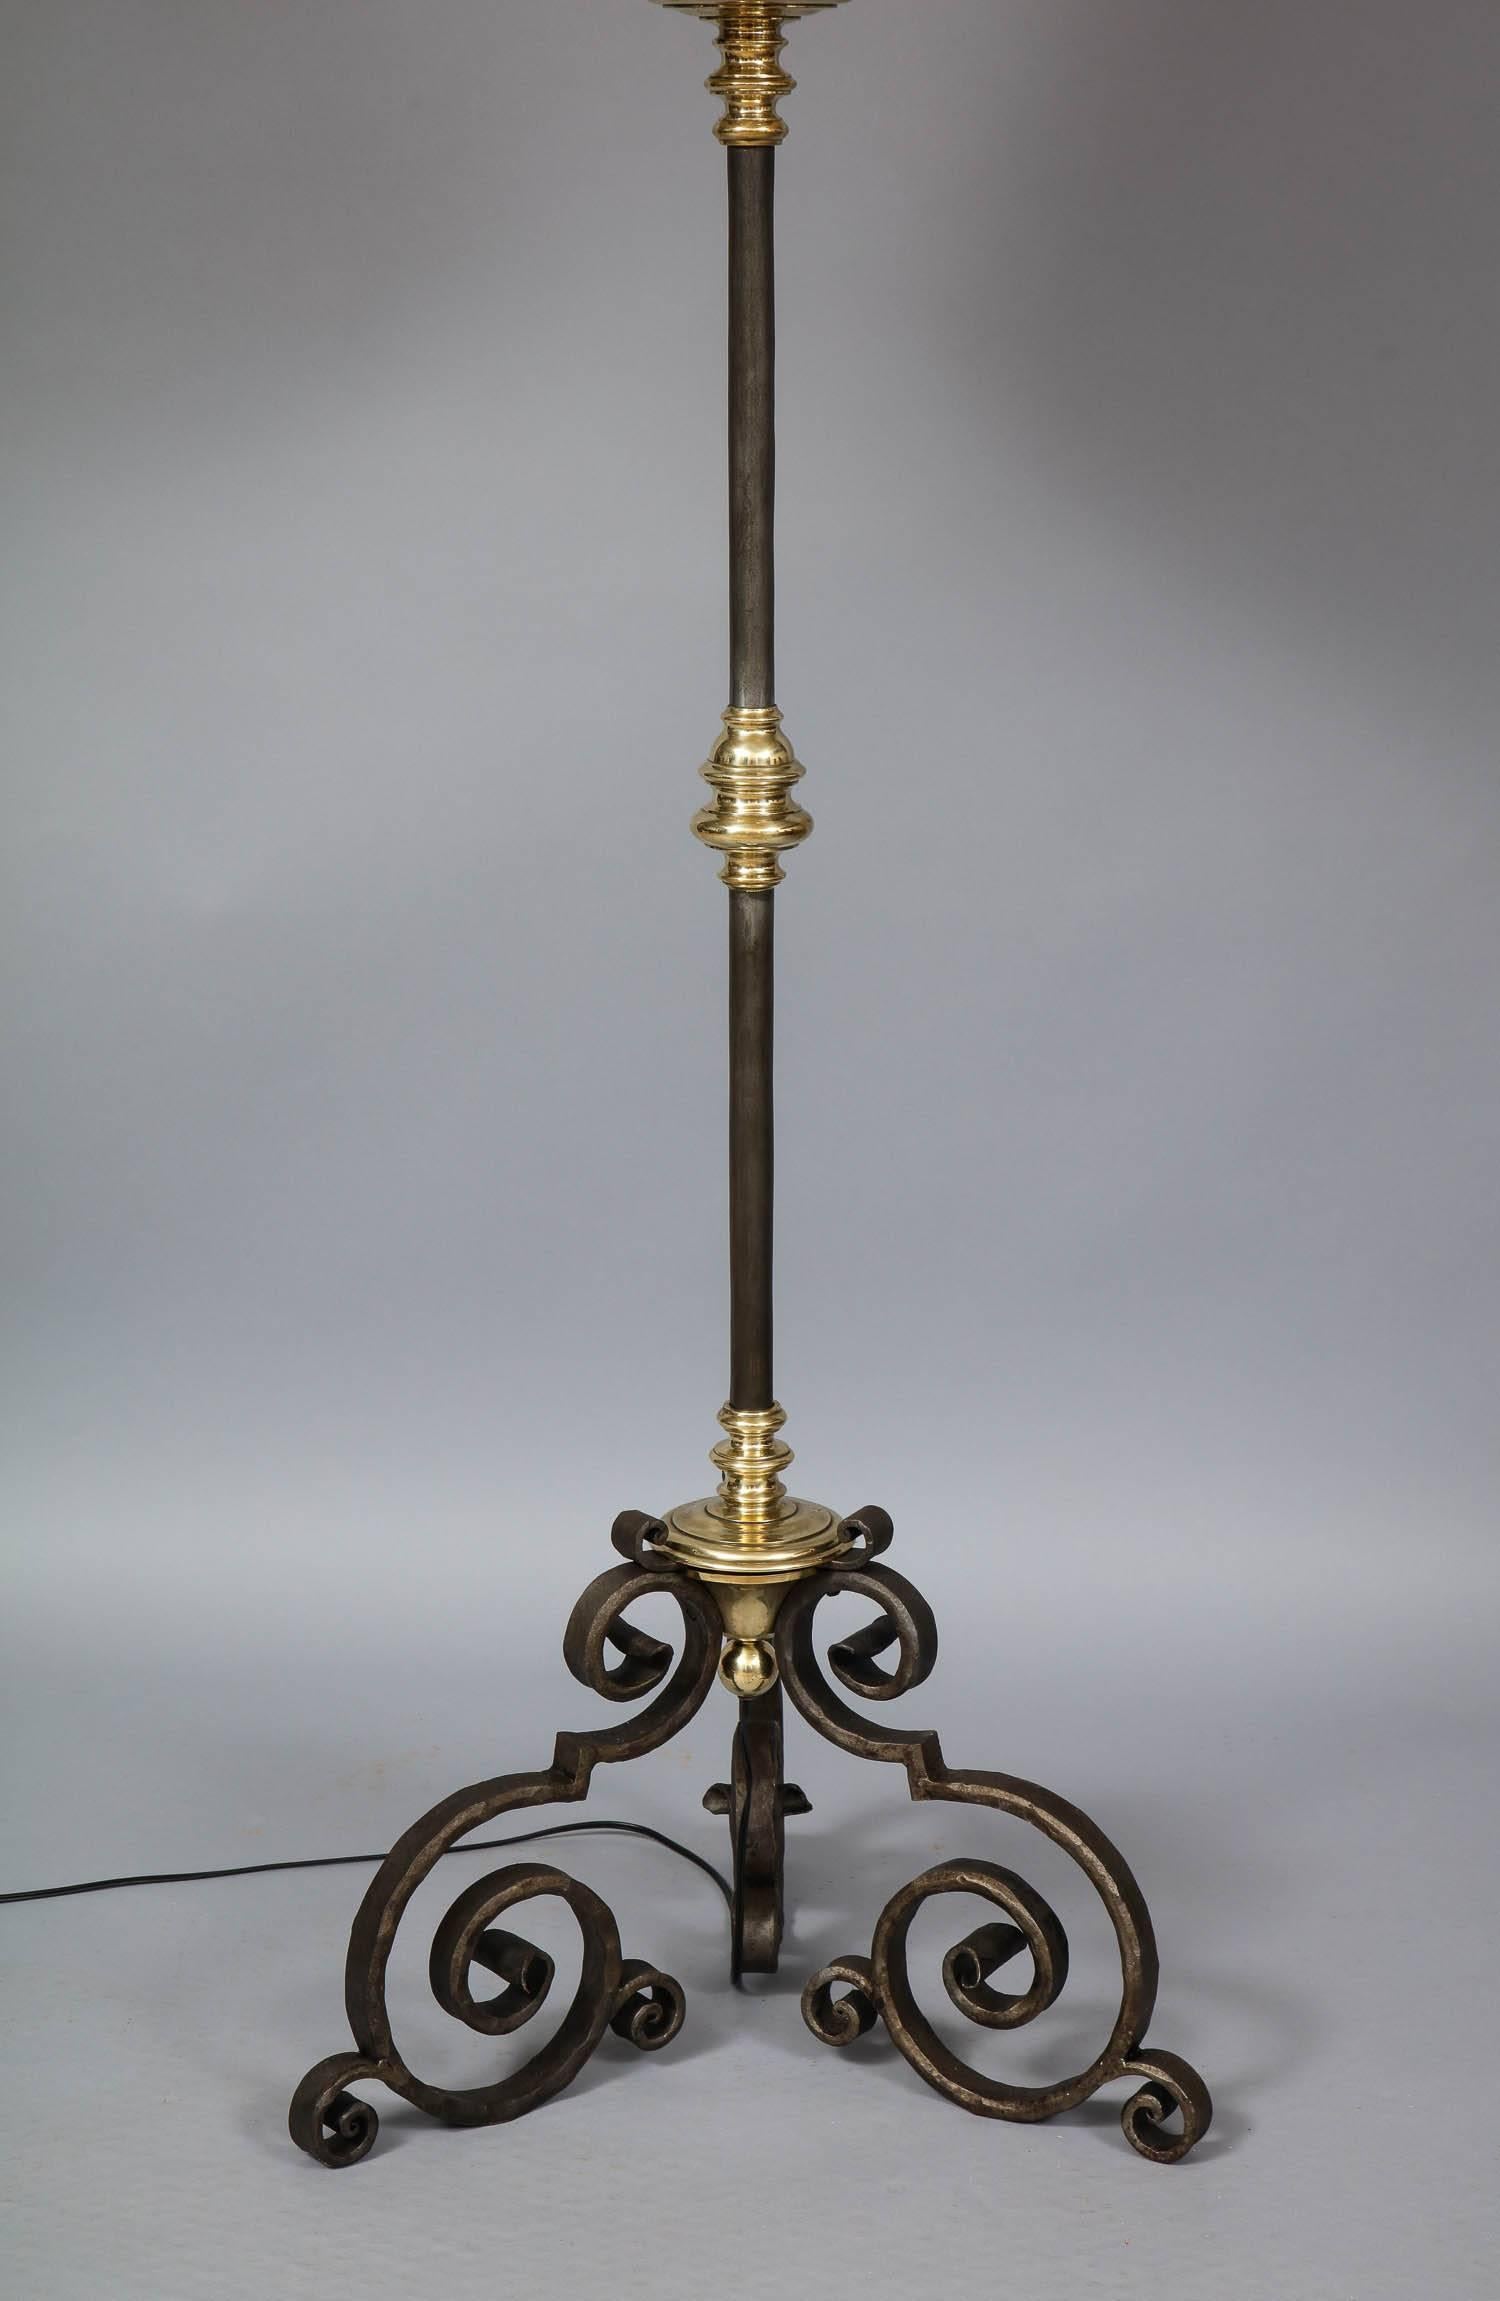 Fine wrought iron and brass Baroque style floor lamp having patinated iron shaft with turned brass collars, the base having scrolled form, the whole of pleasing proportion.